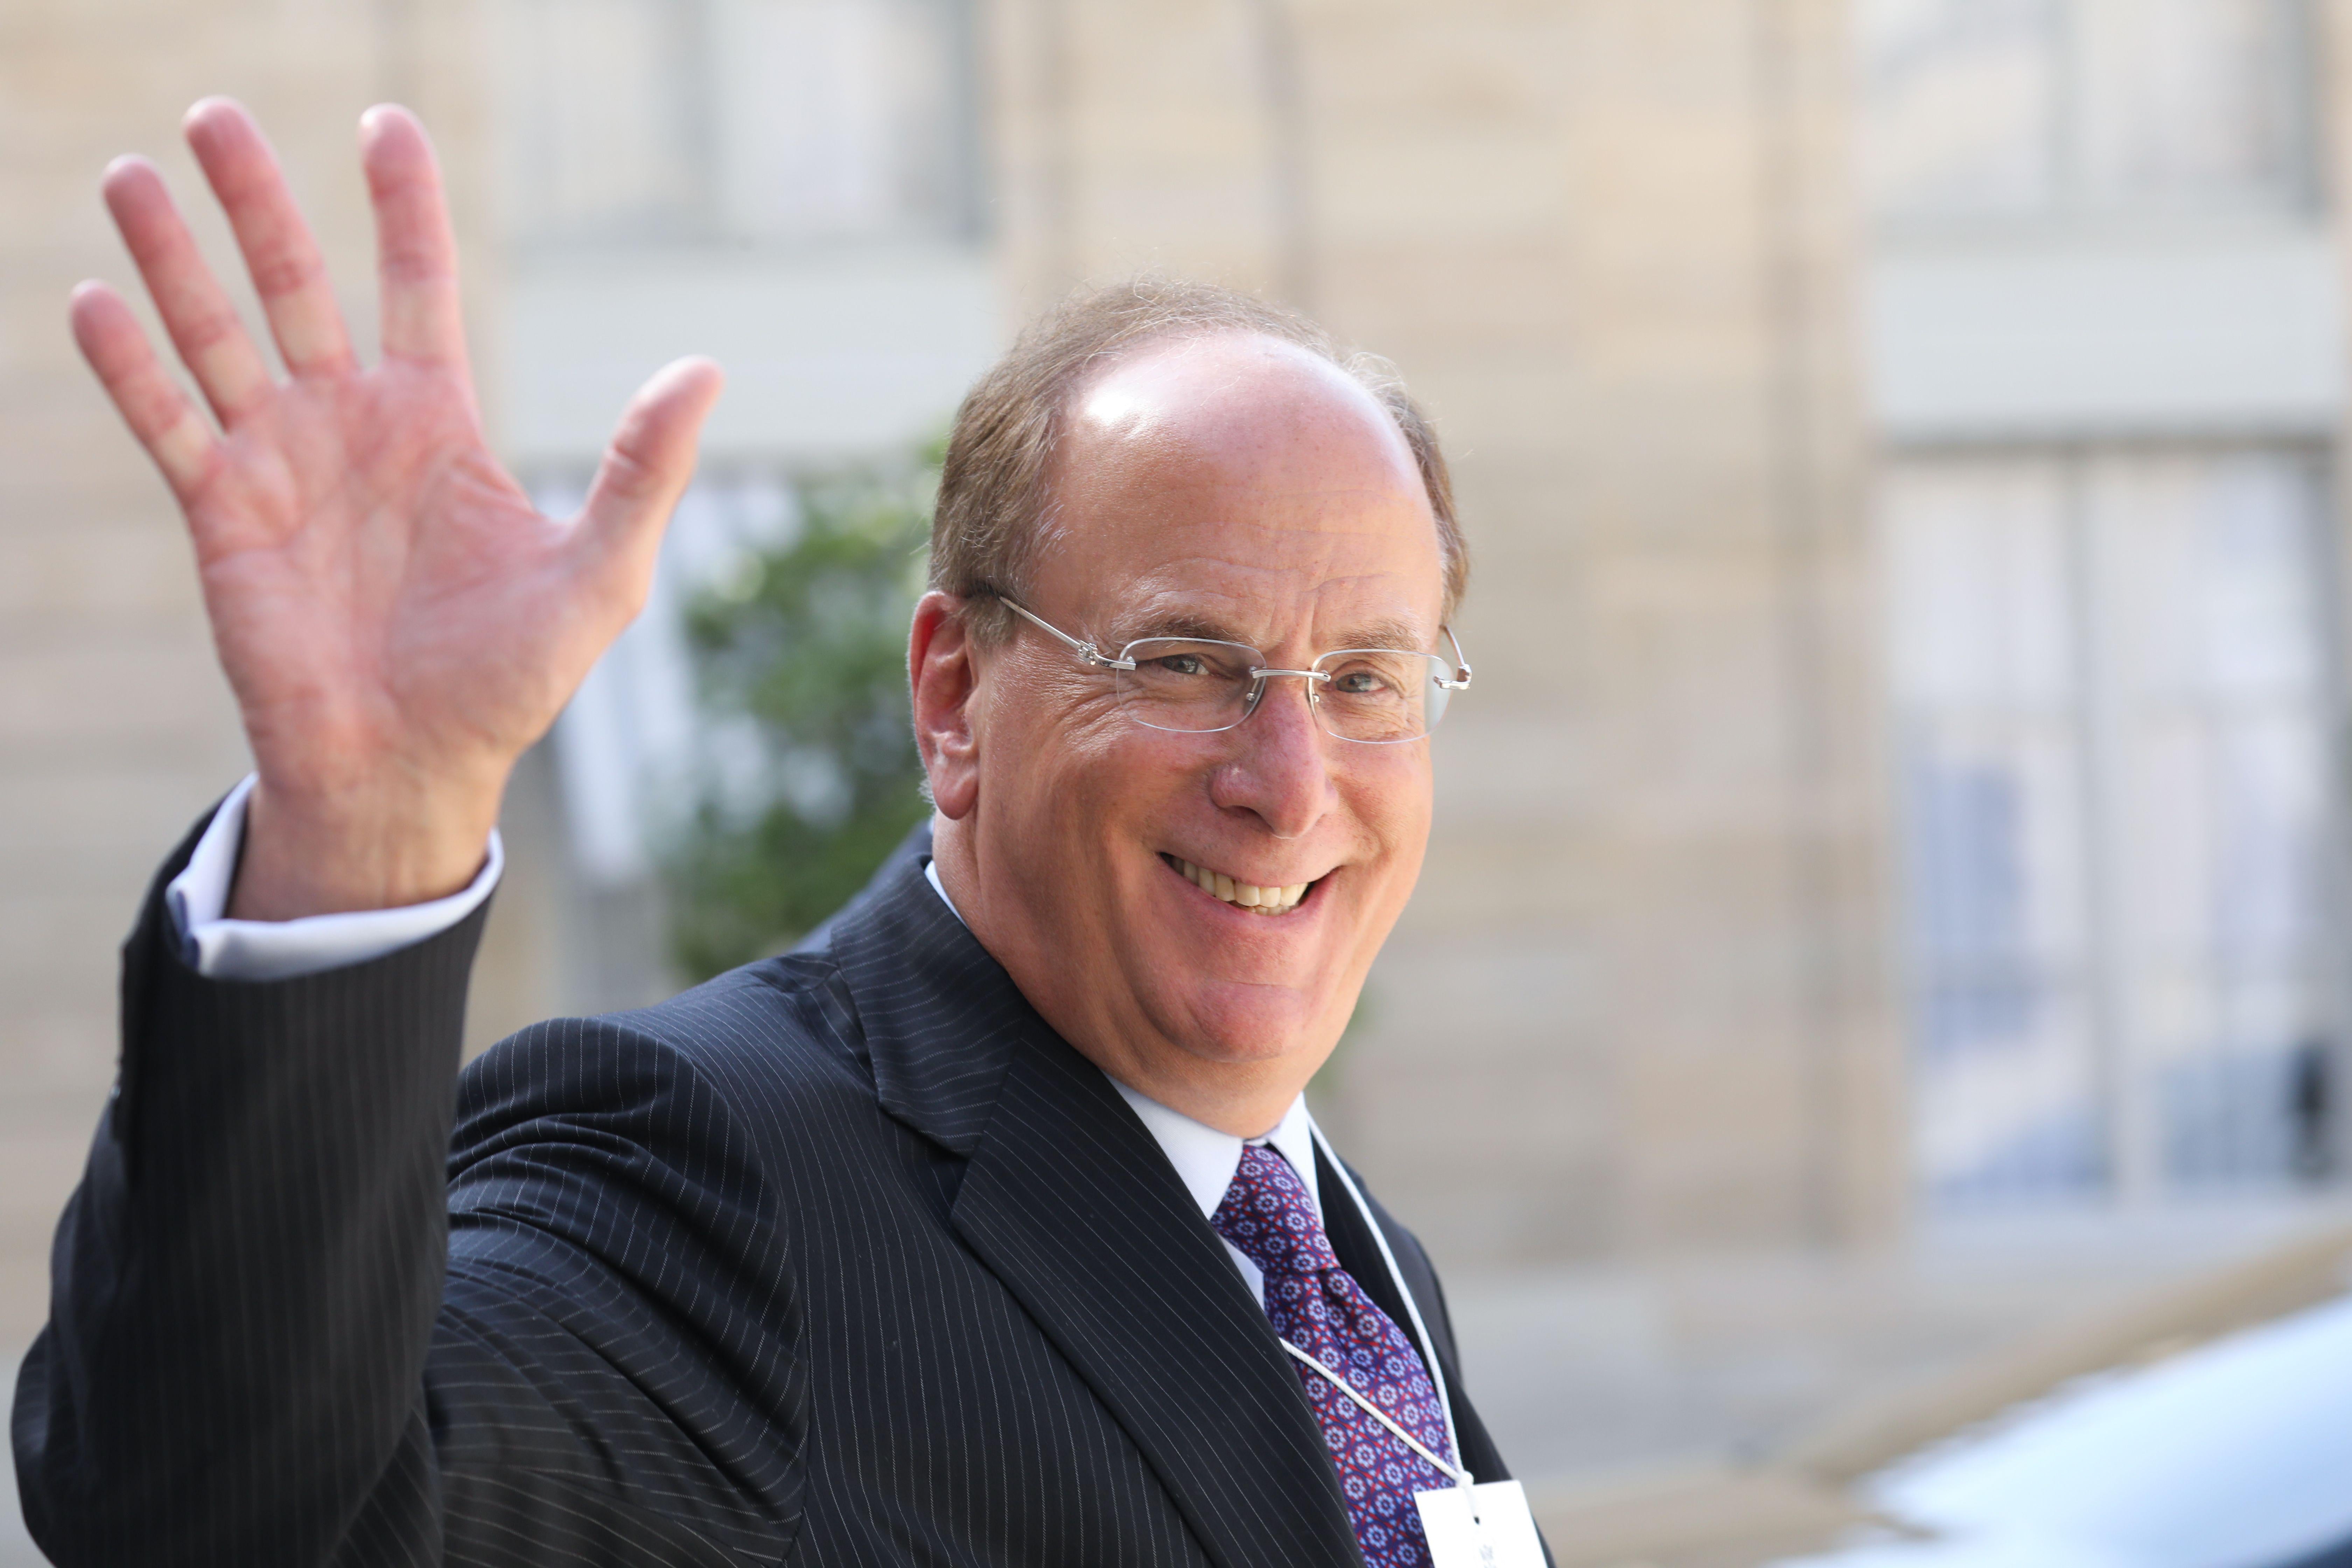 Chairman and CEO of BlackRock Larry Fink  waves as he leaves Elysee Palace.